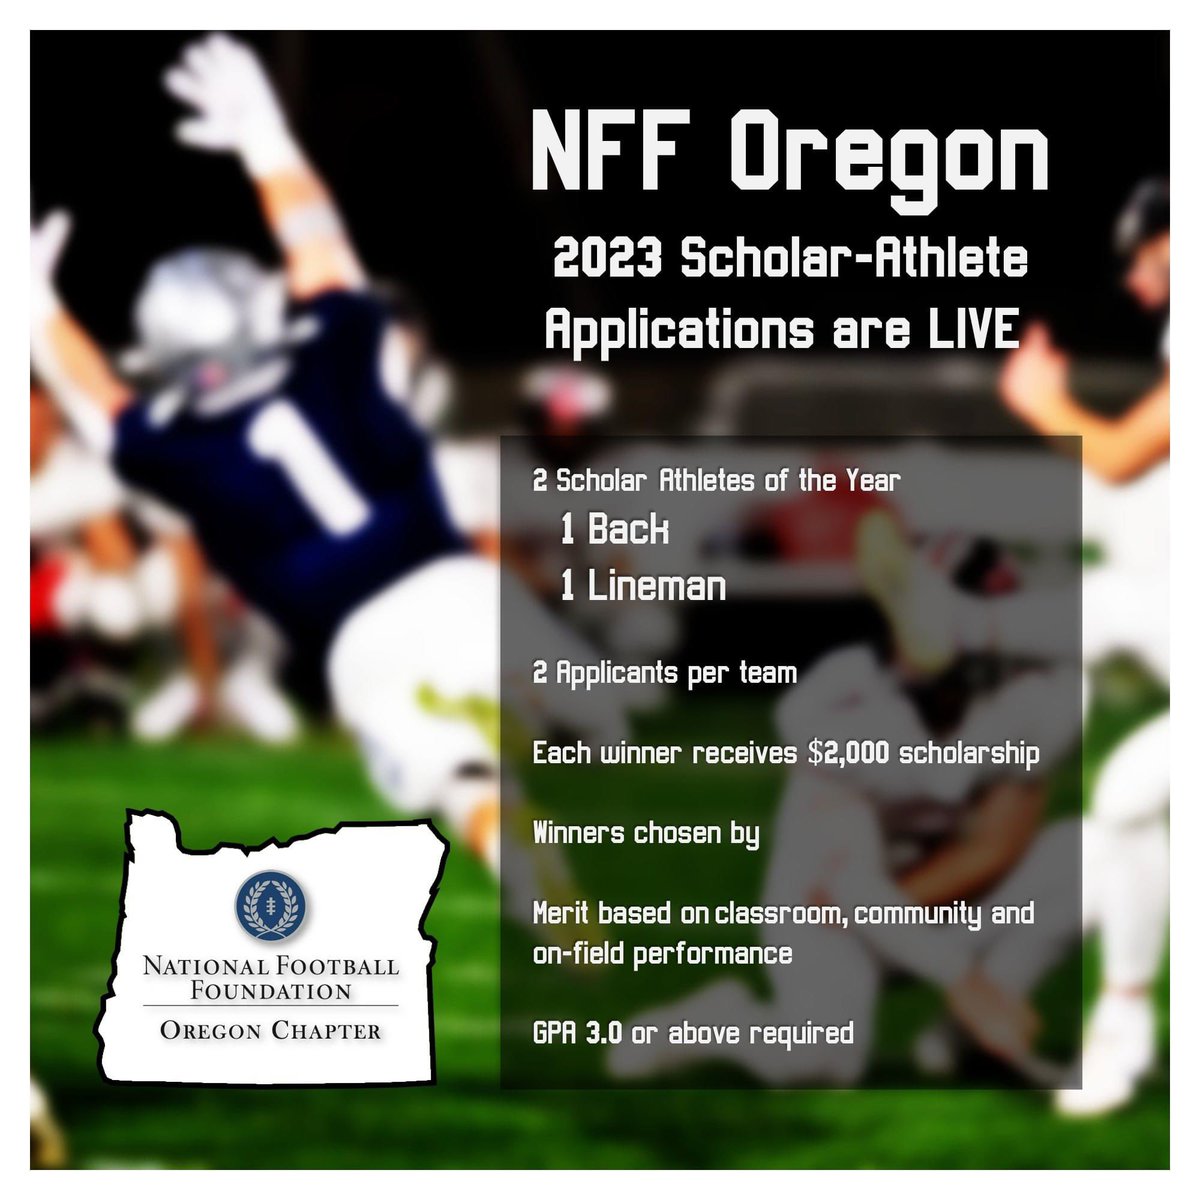 Coaches, check your inboxes - @NFFOregon Scholar-Athlete of the Year applications are now live!